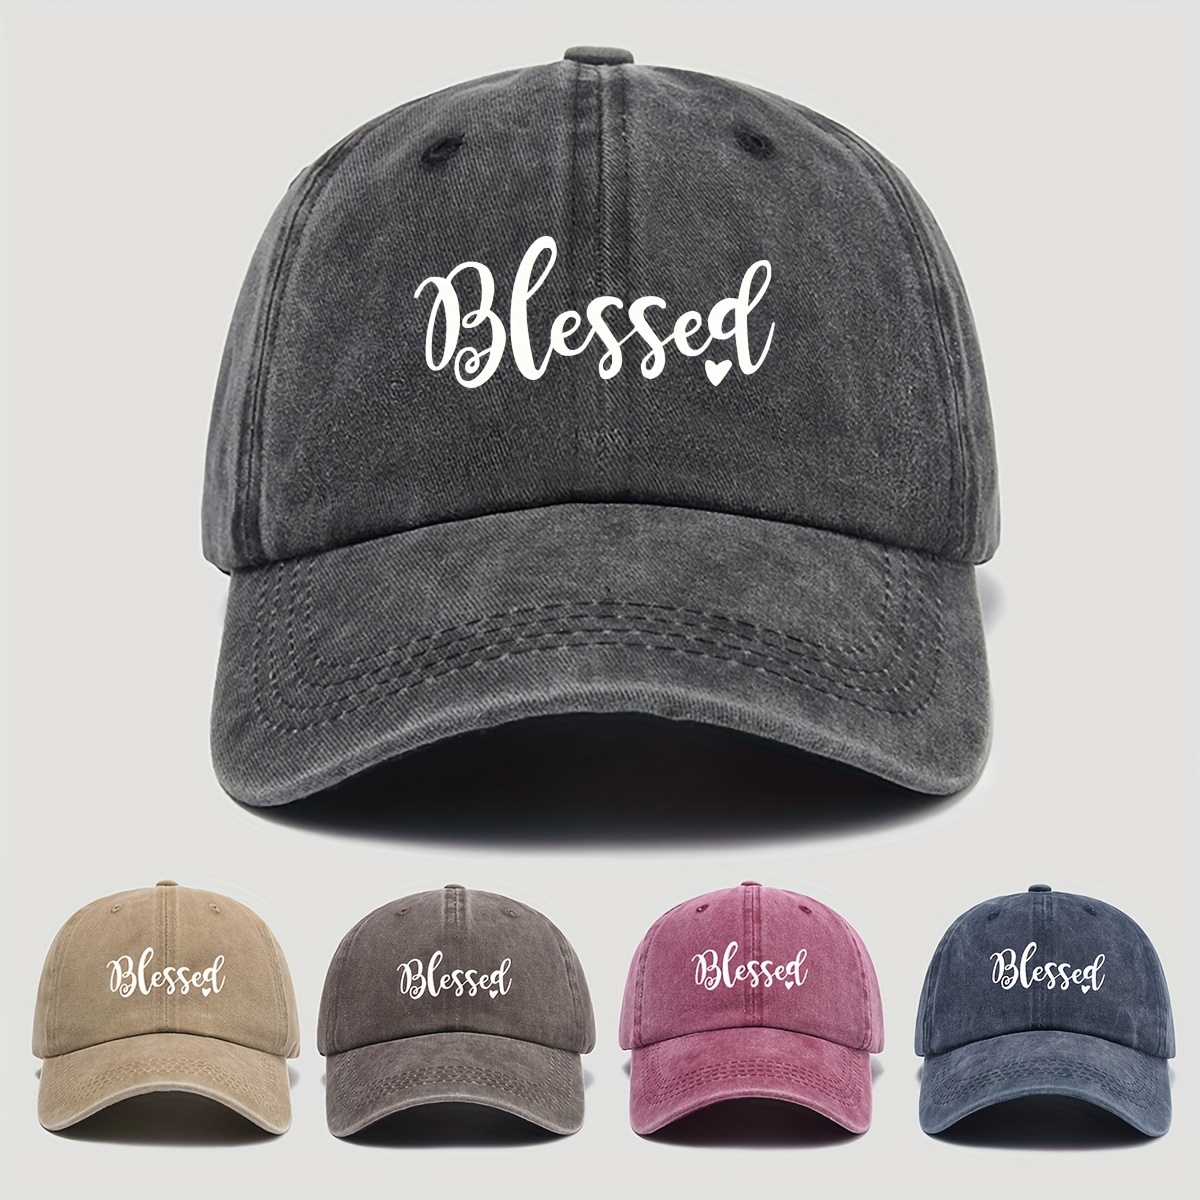 

Vintage Washed "blessed" Print Adjustable Baseball Cap, Unisex Outdoor Sun Protection Trendy Hat, 1 Size Fits All